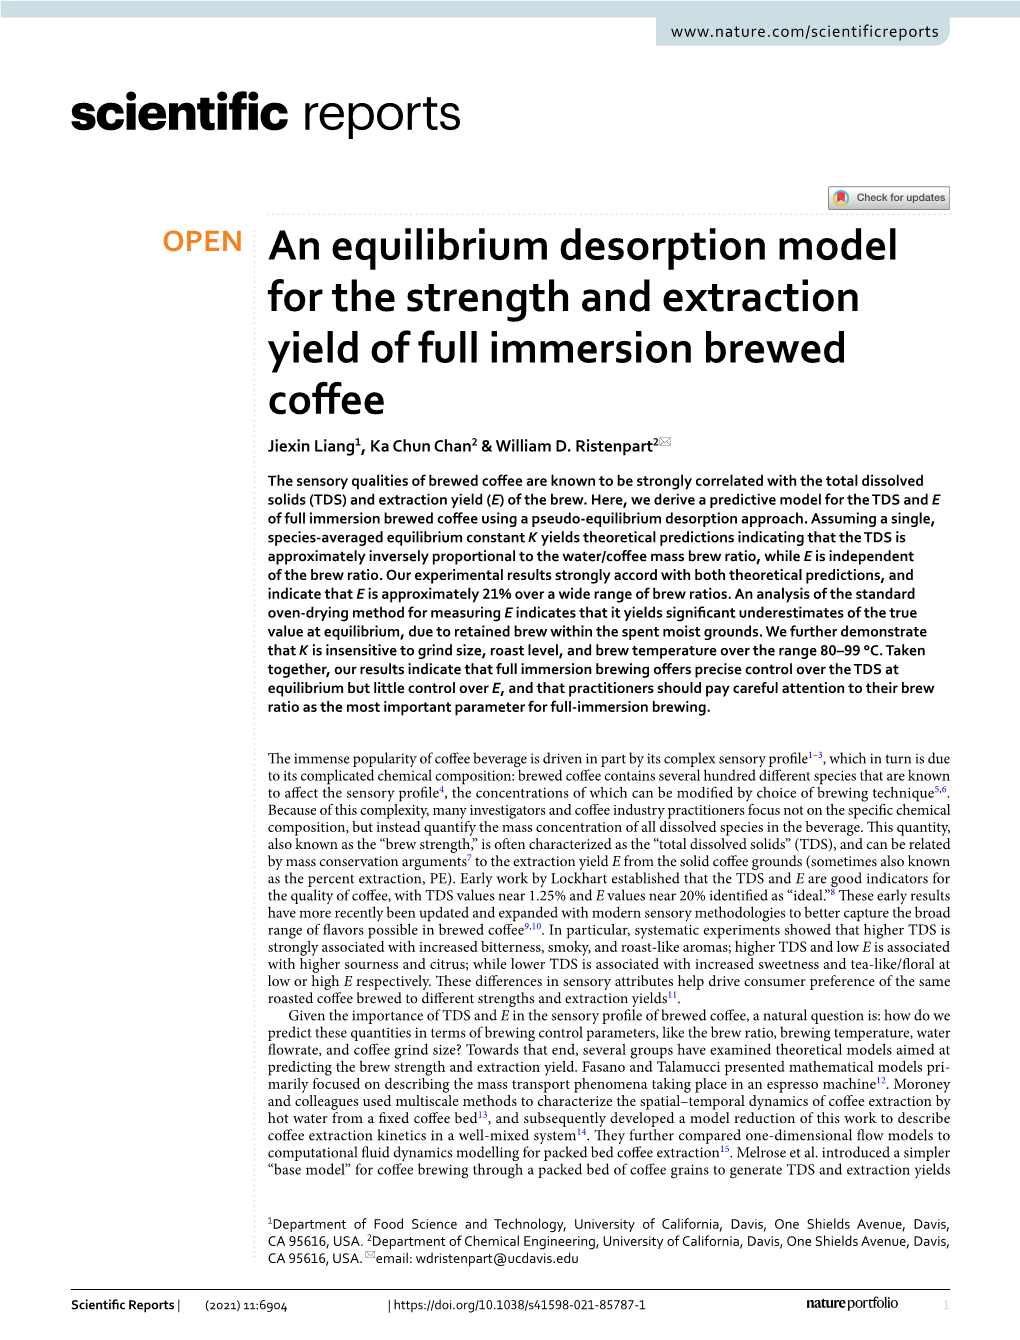 An Equilibrium Desorption Model for the Strength and Extraction Yield of Full Immersion Brewed Cofee Jiexin Liang1, Ka Chun Chan2 & William D